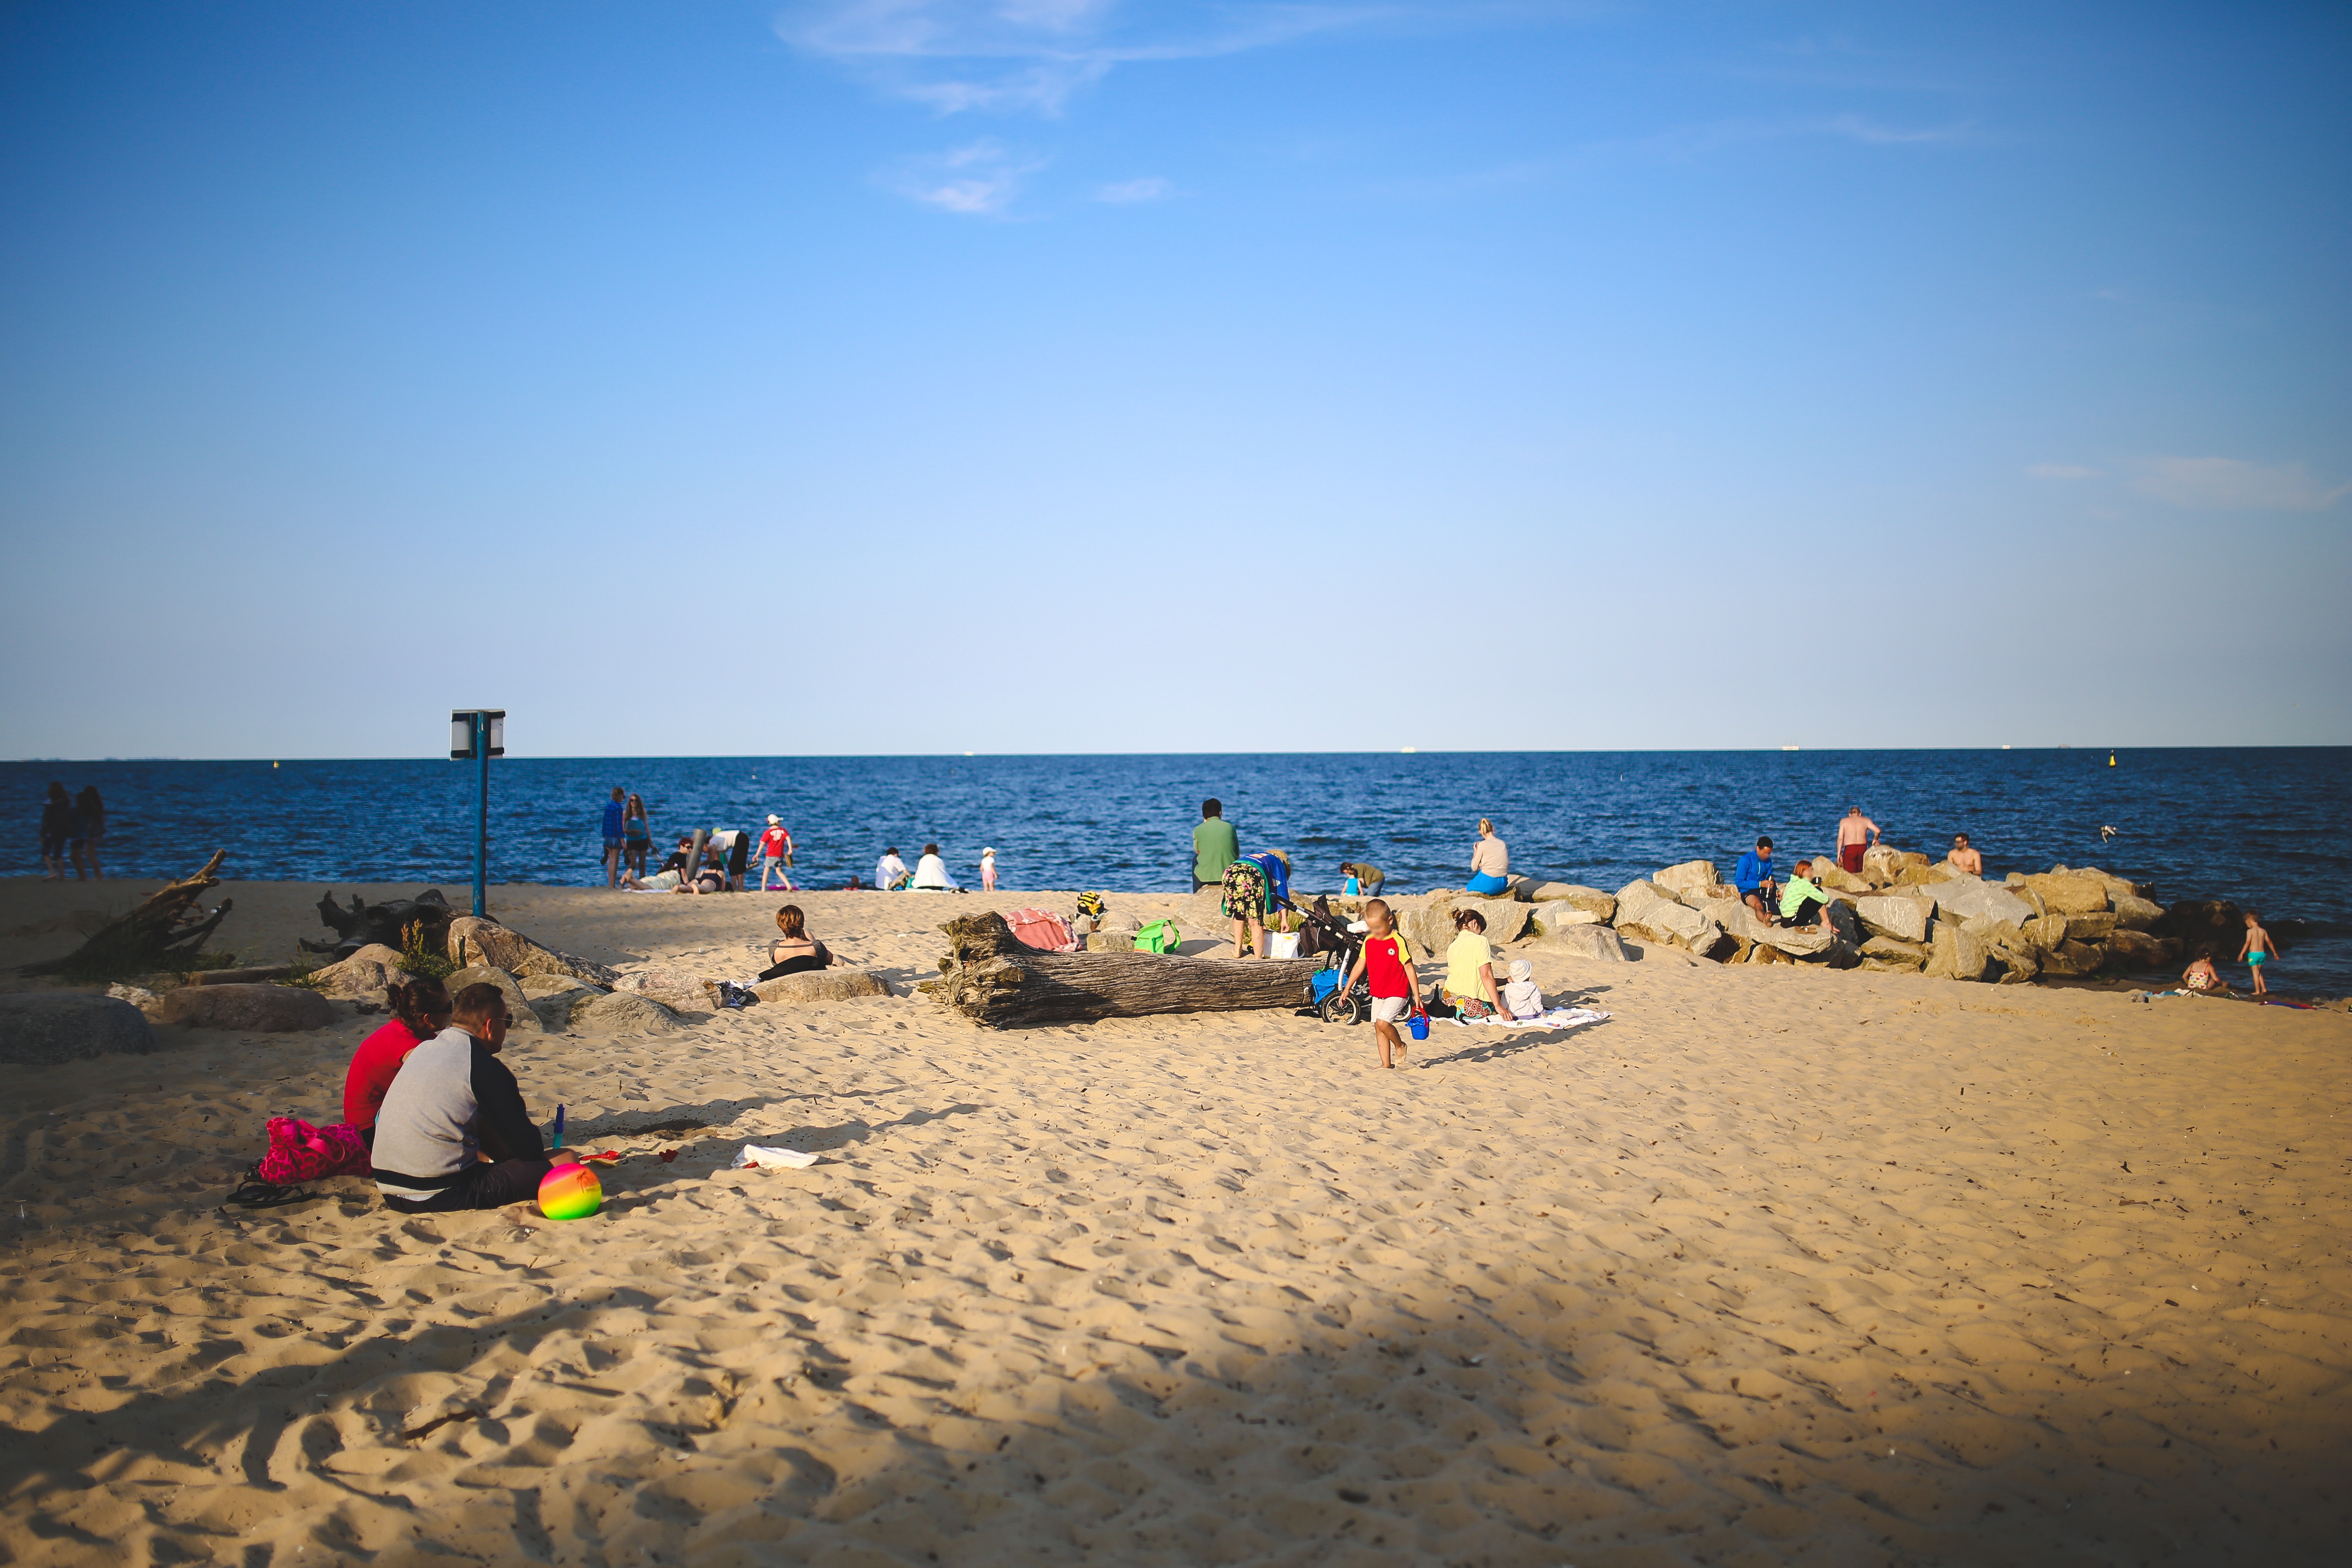 People on the beach, Baltic, Seascape, Vacation, Tropical, HQ Photo